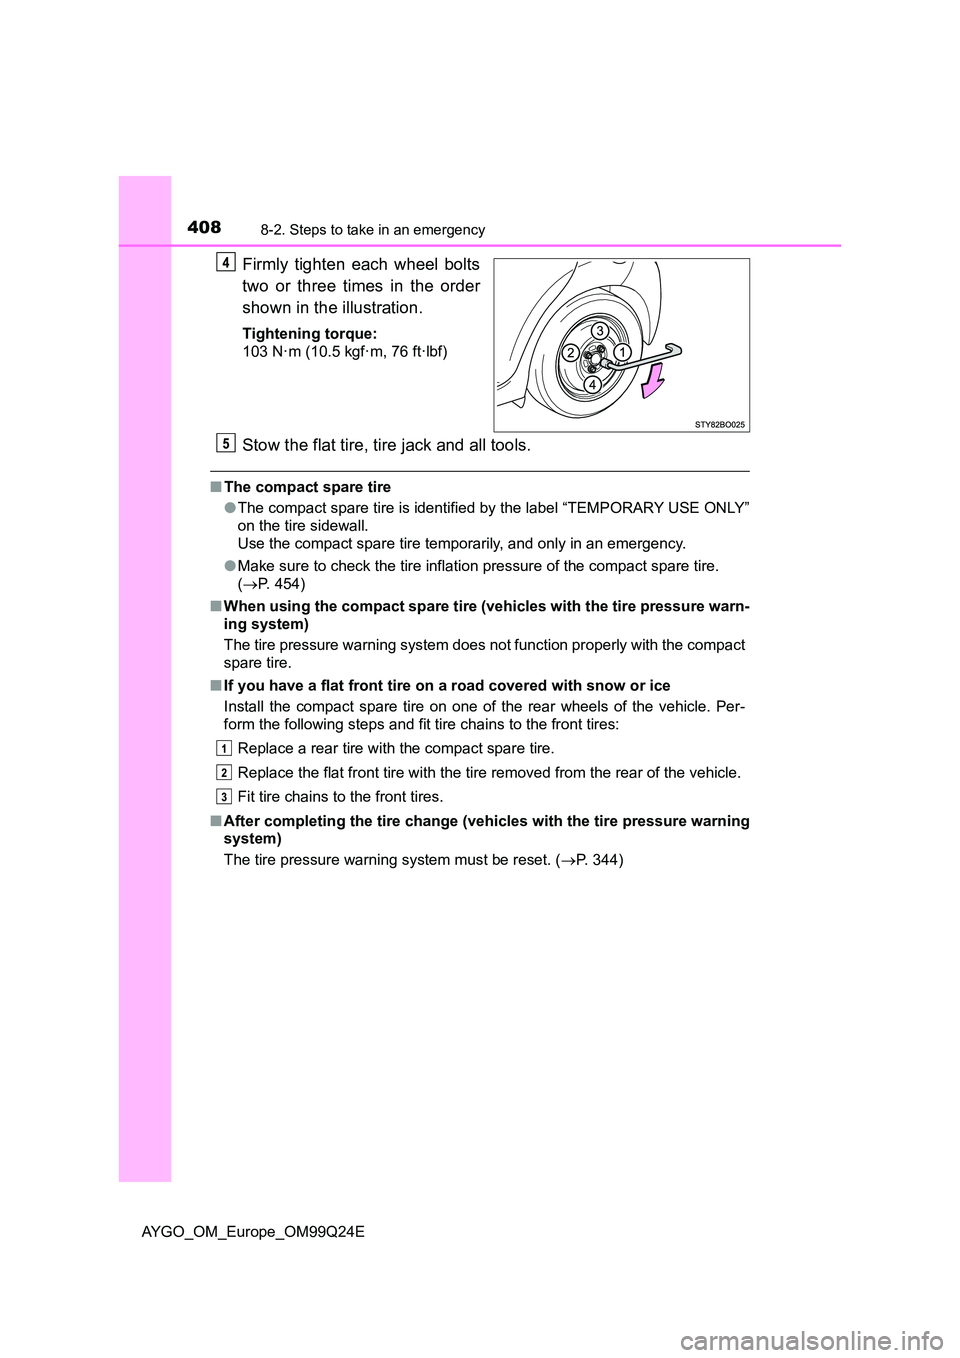 TOYOTA AYGO 2017  Owners Manual (in English) 4088-2. Steps to take in an emergency
AYGO_OM_Europe_OM99Q24E
Firmly tighten each wheel bolts 
two or three times in the order 
shown in the illustration.
Tightening torque: 
103 N·m (10.5 kgf·m, 76